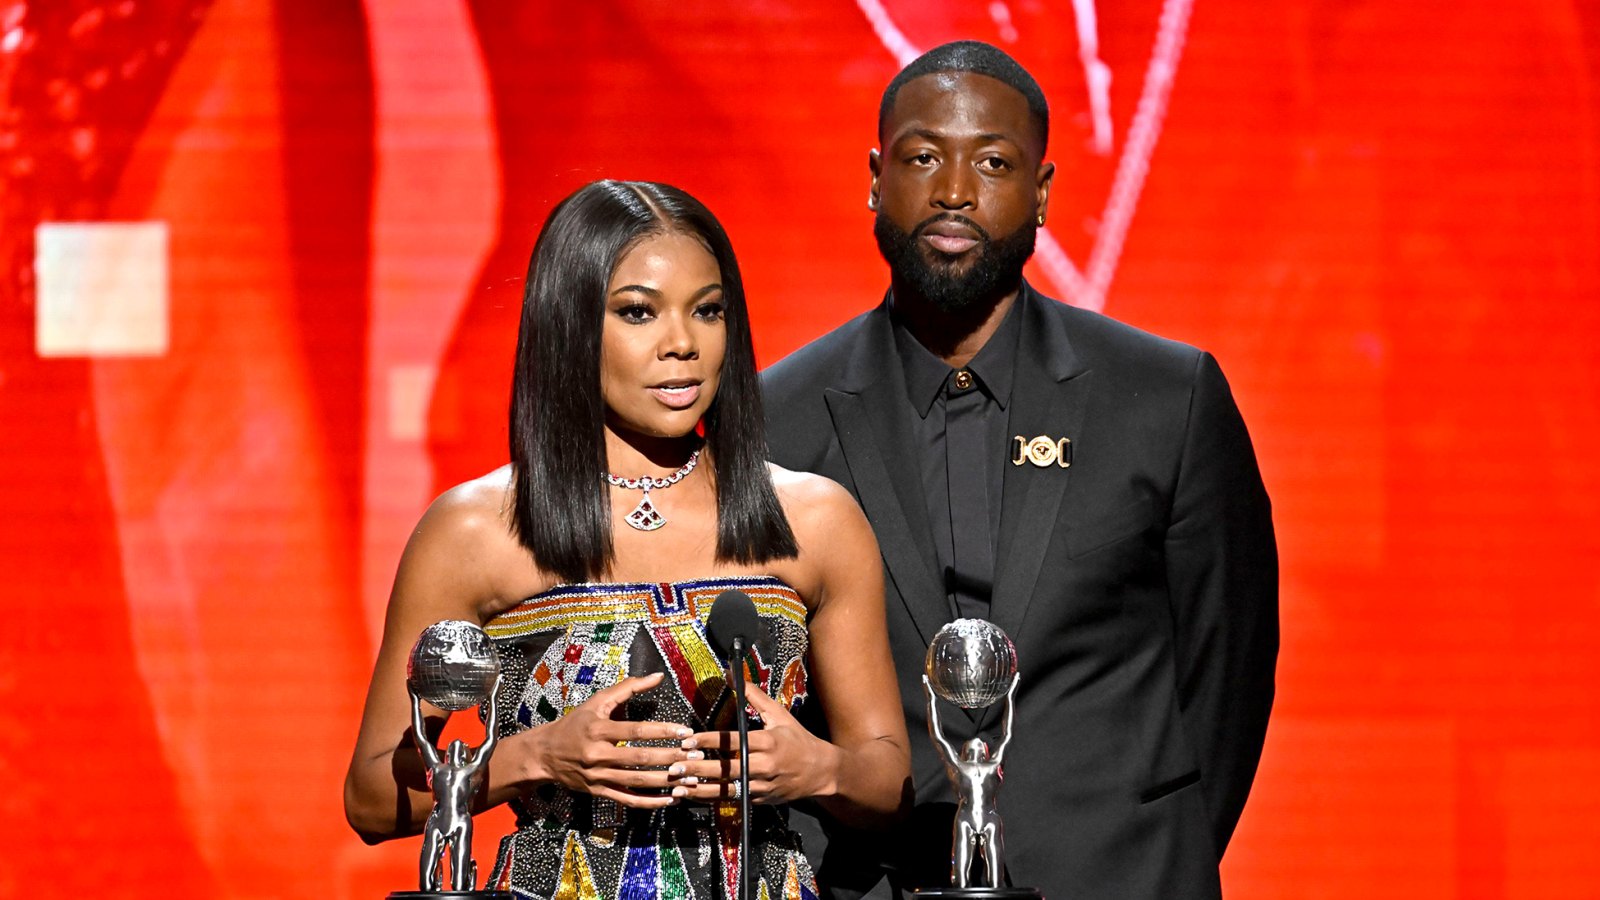 Dwyane Wade, Gabrielle Union Accept 'Humbling' NAACP Honor After Daughter Zaya’s Legal Name Change